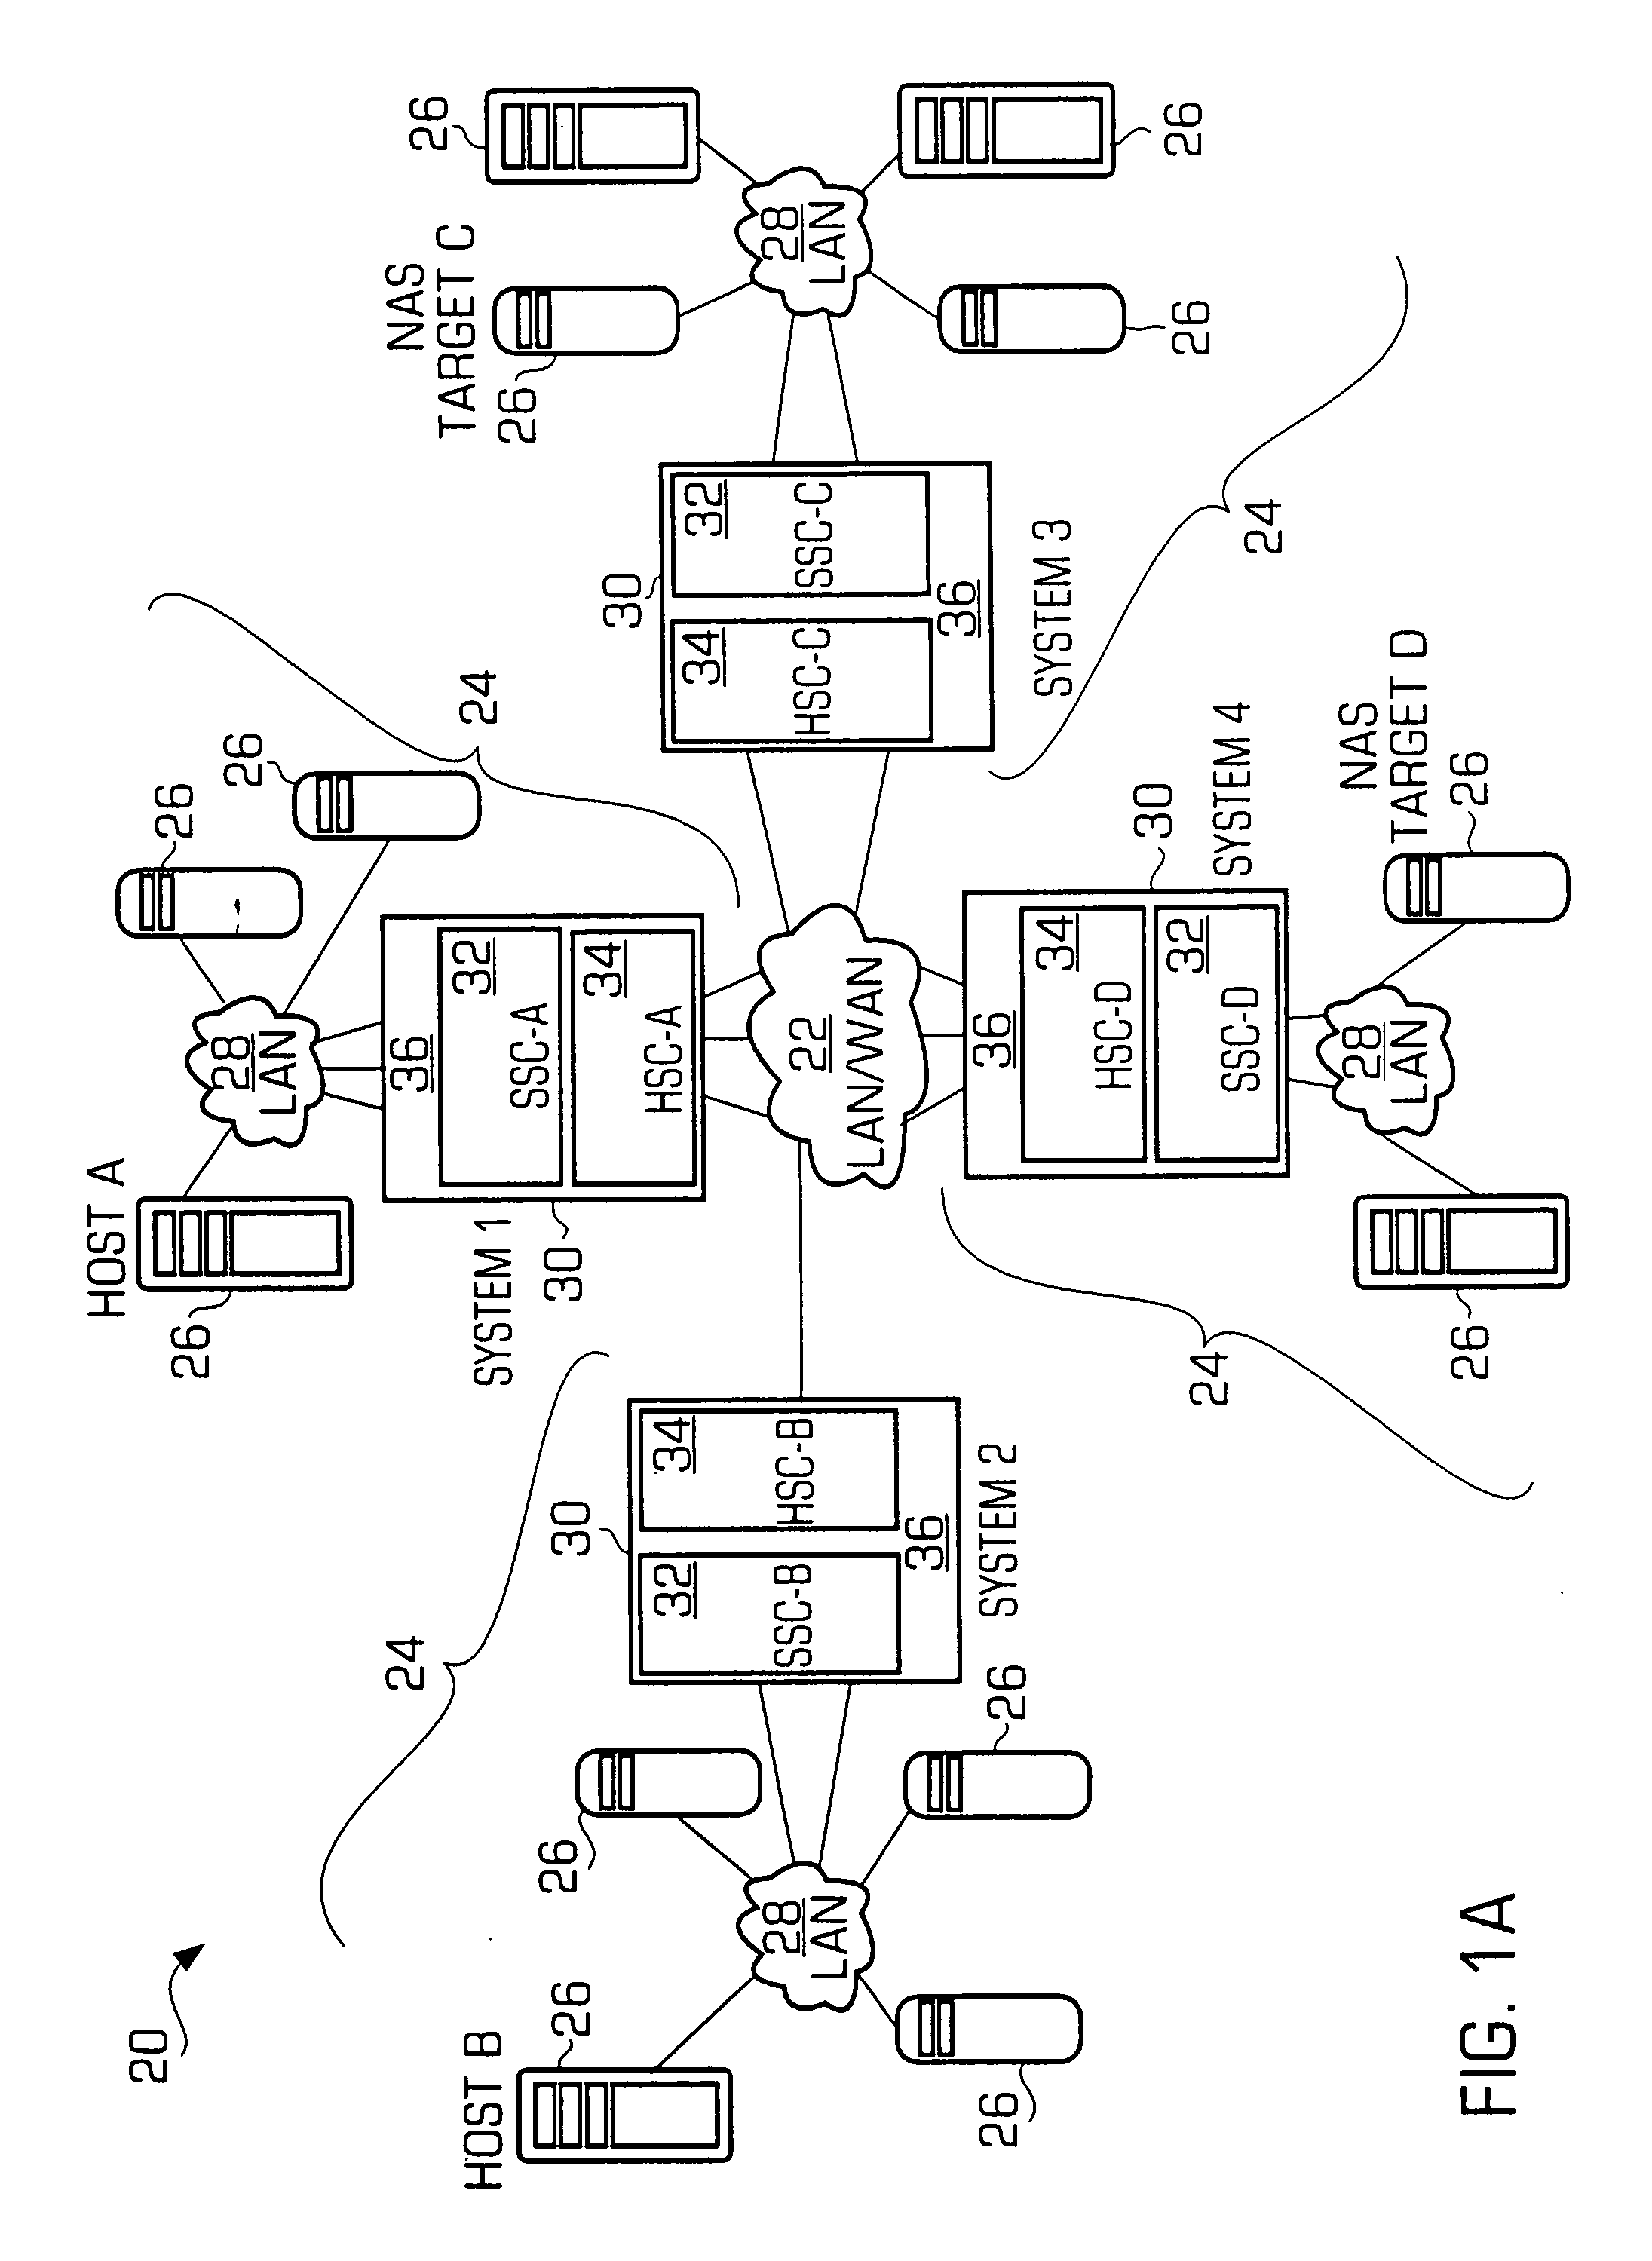 Caching system and method for a network storage system